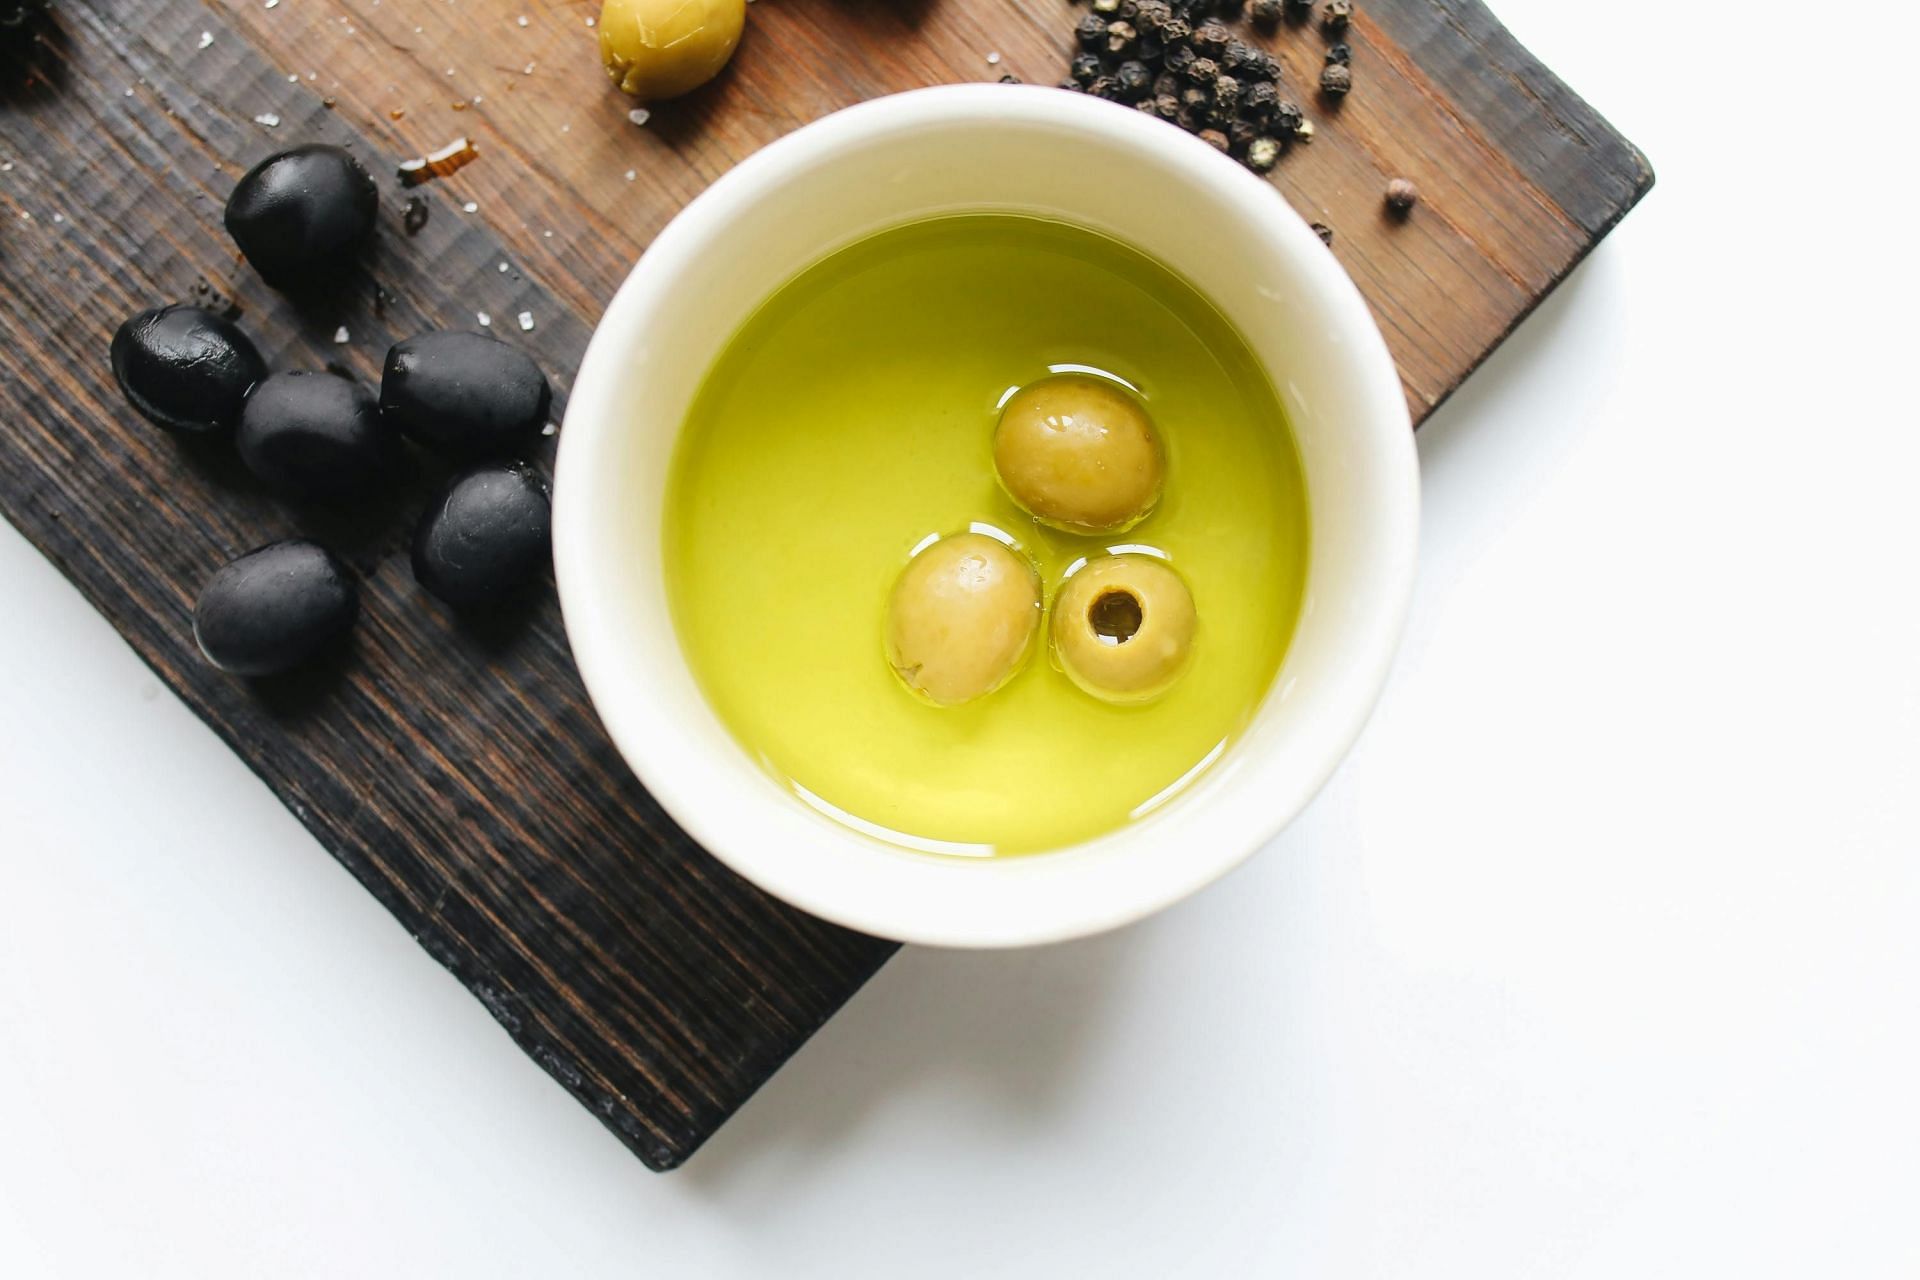 Importance of olive oil (image sourced via Pexels / Photo by polina)